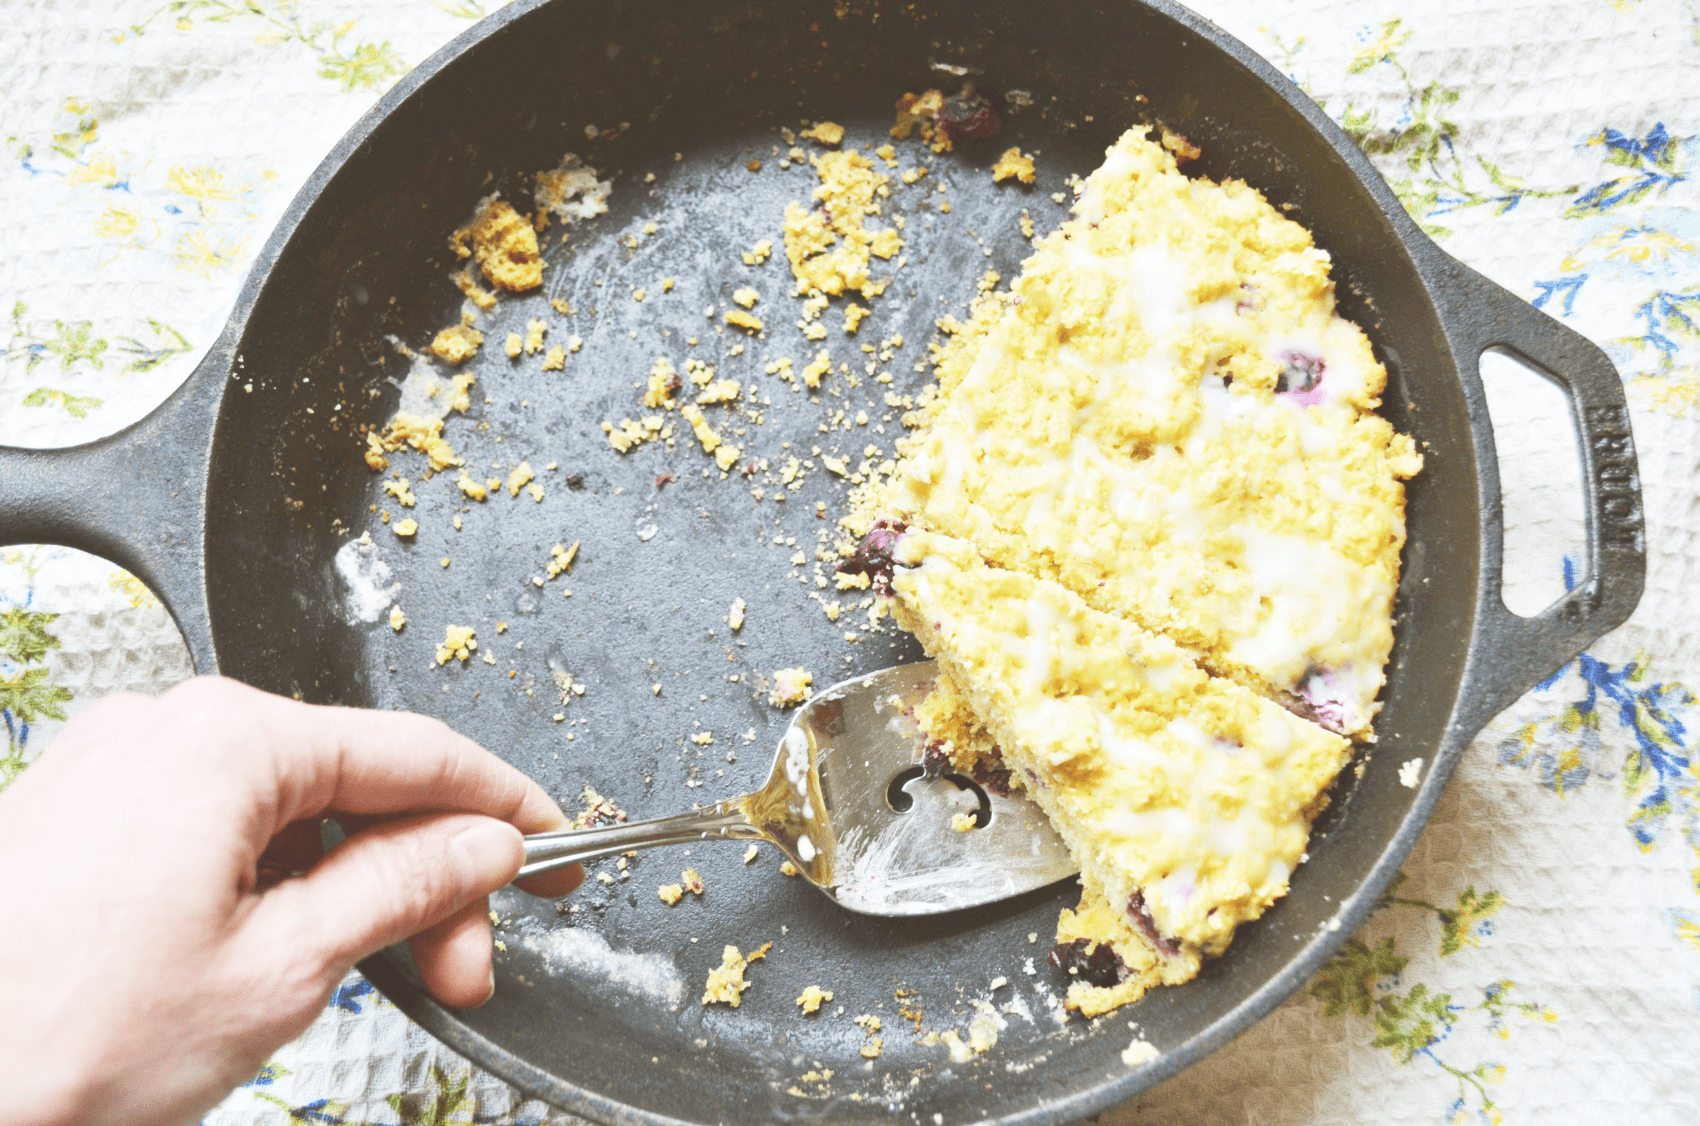 a hand reaches to scoop out a bright icing drizzled slice of blueberry lemon einkorn flour scones in an iron pan.